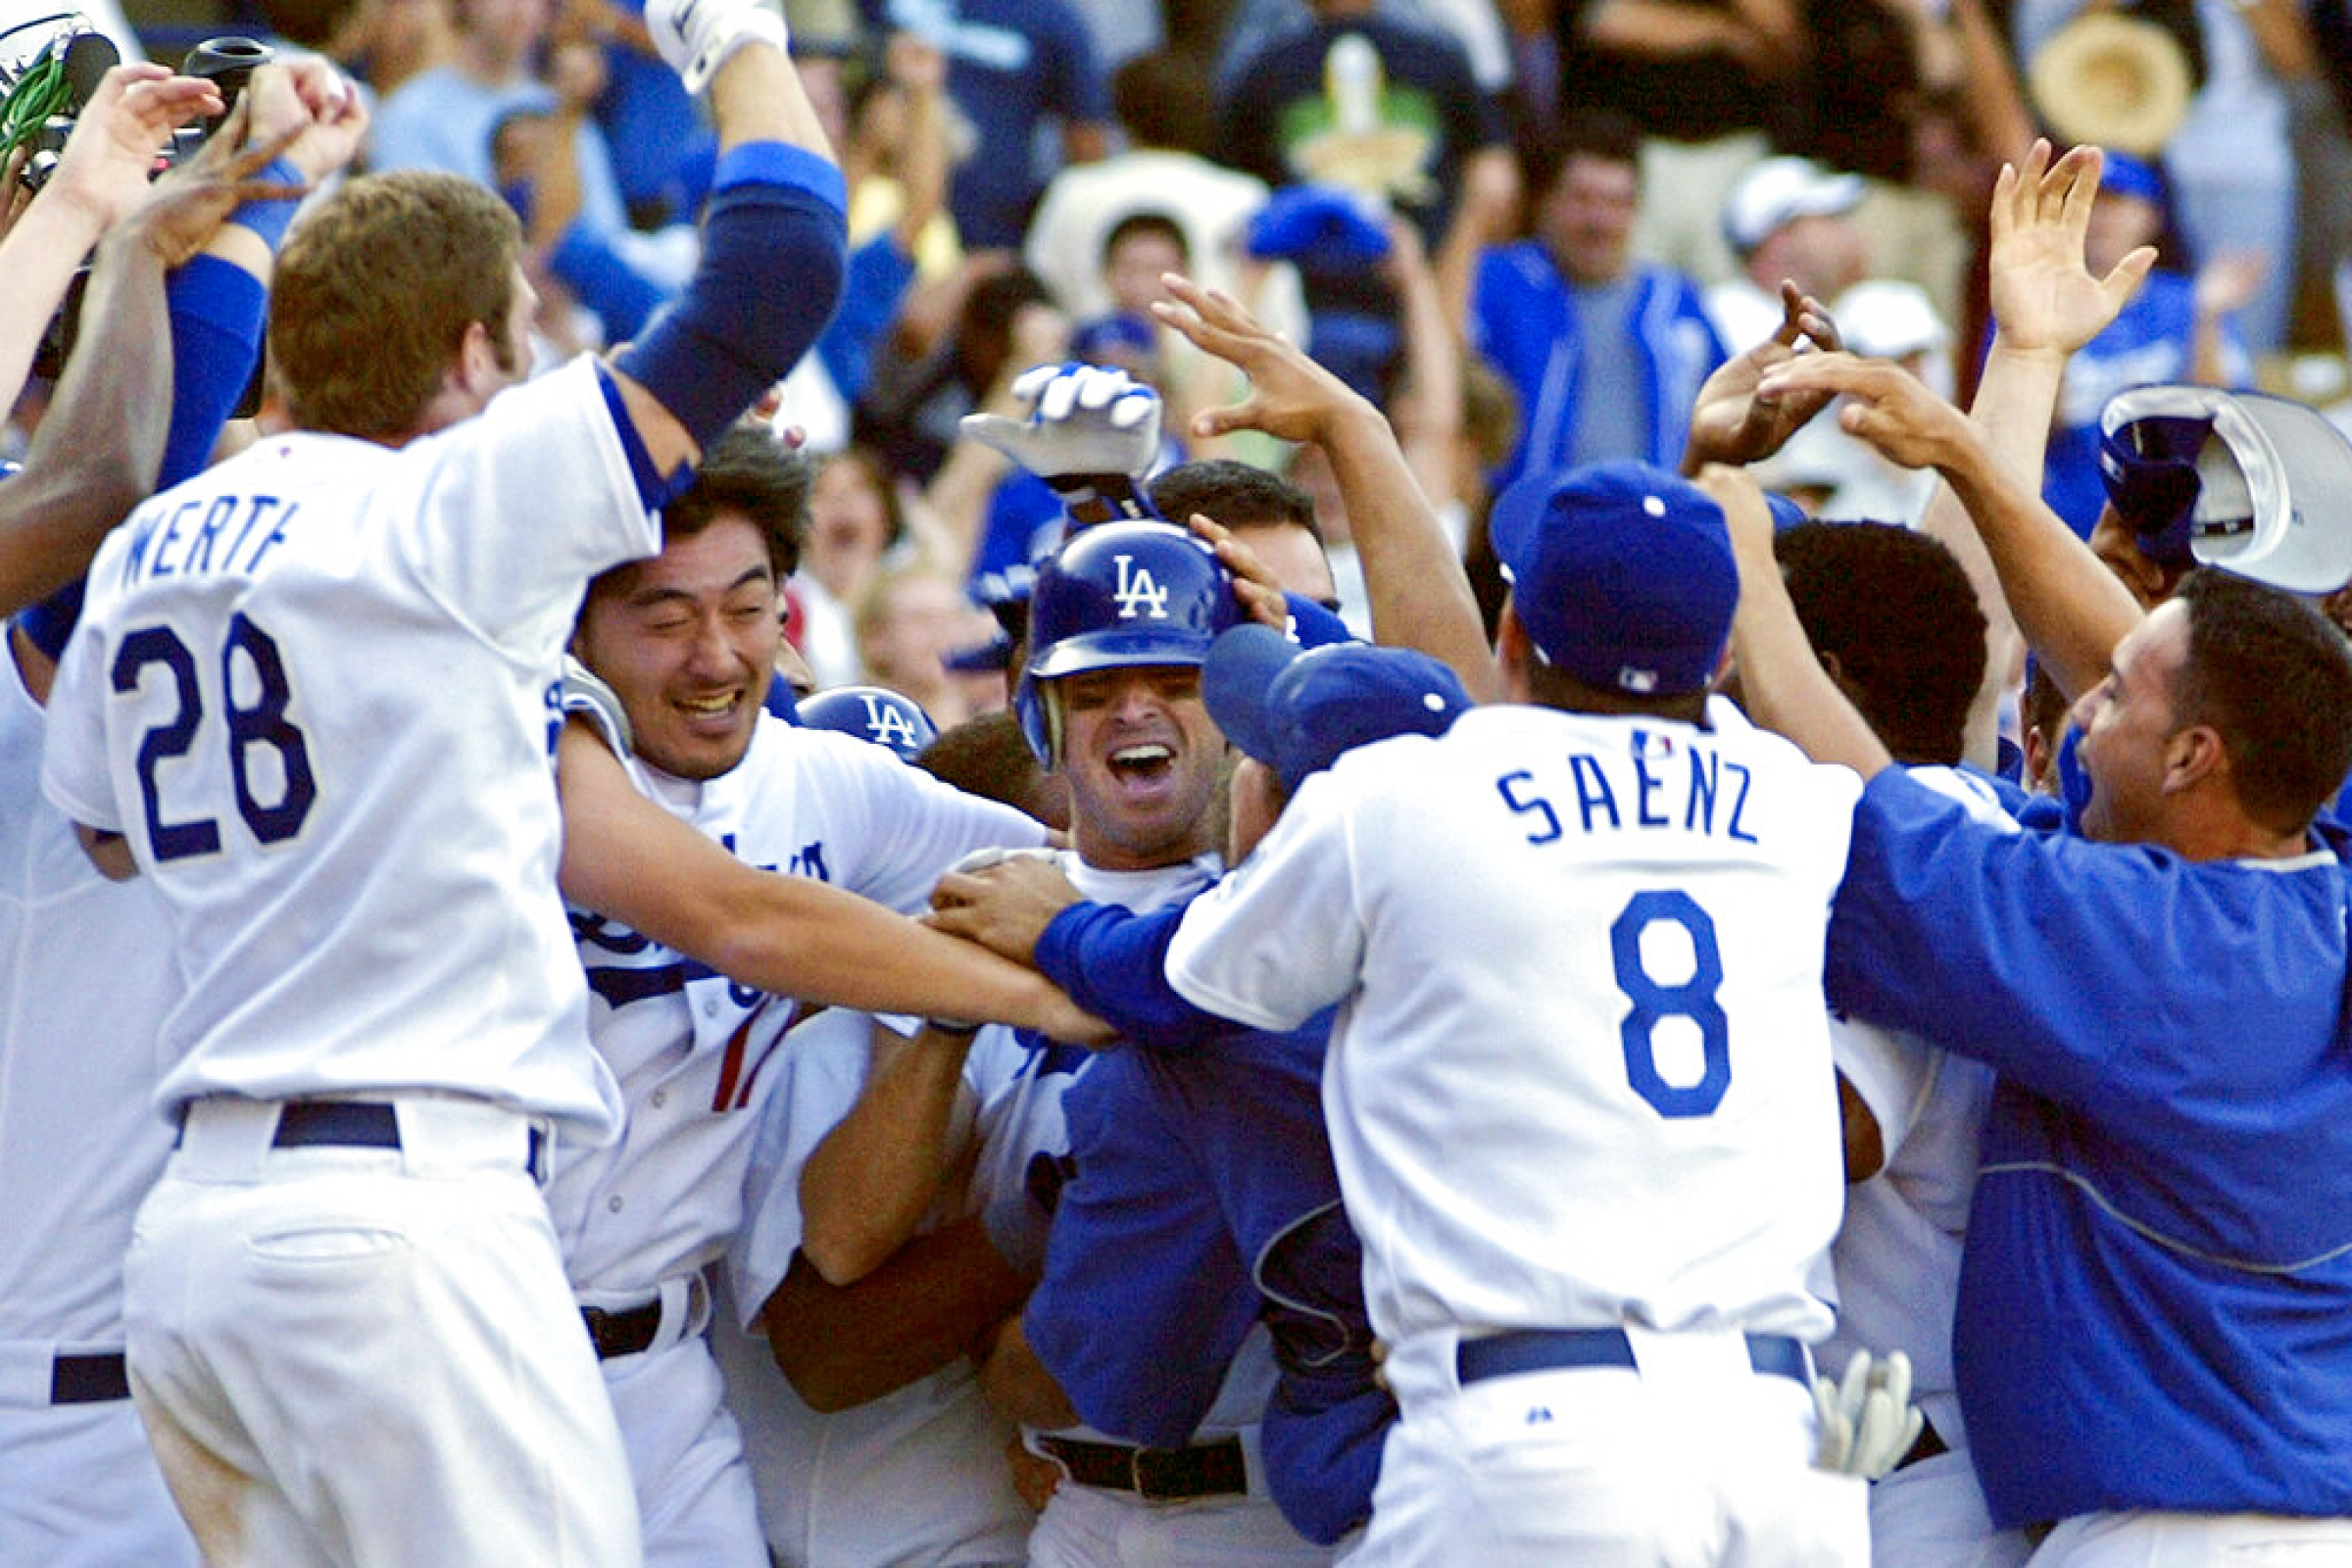 Dodgers' Steve Finley celebrates with teammates after hitting a grand slam.